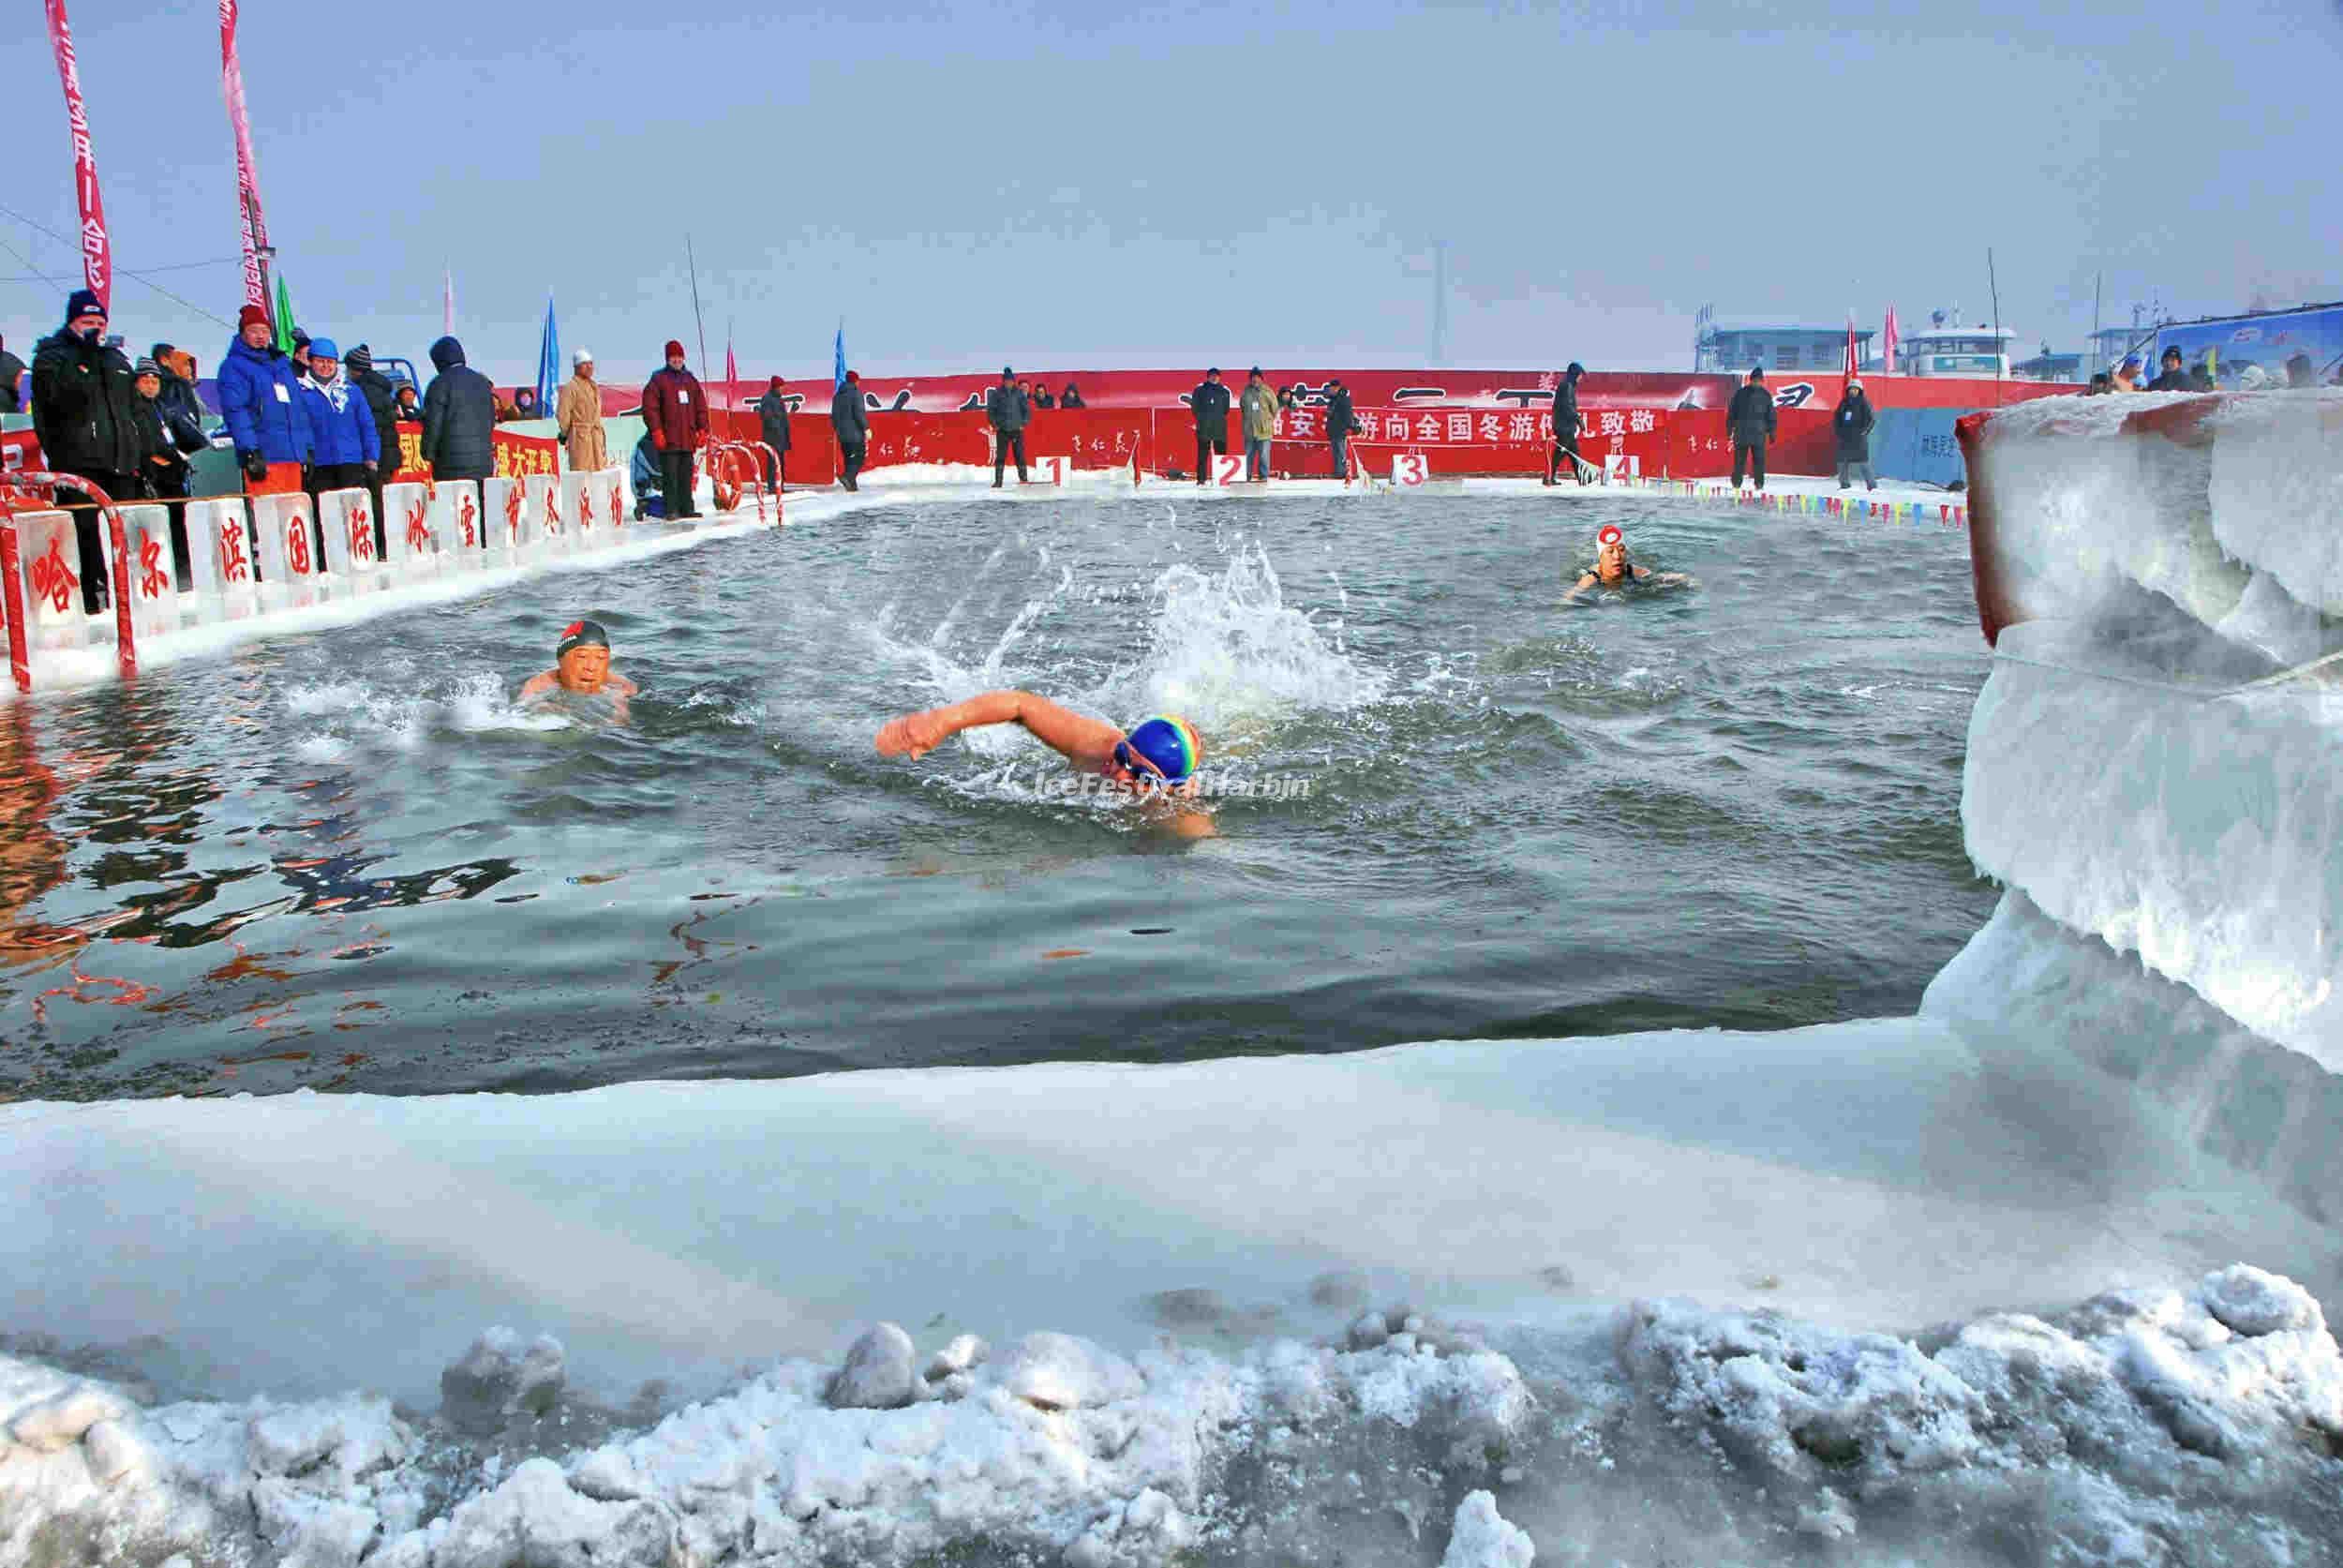 Annual ice swimming festival in china